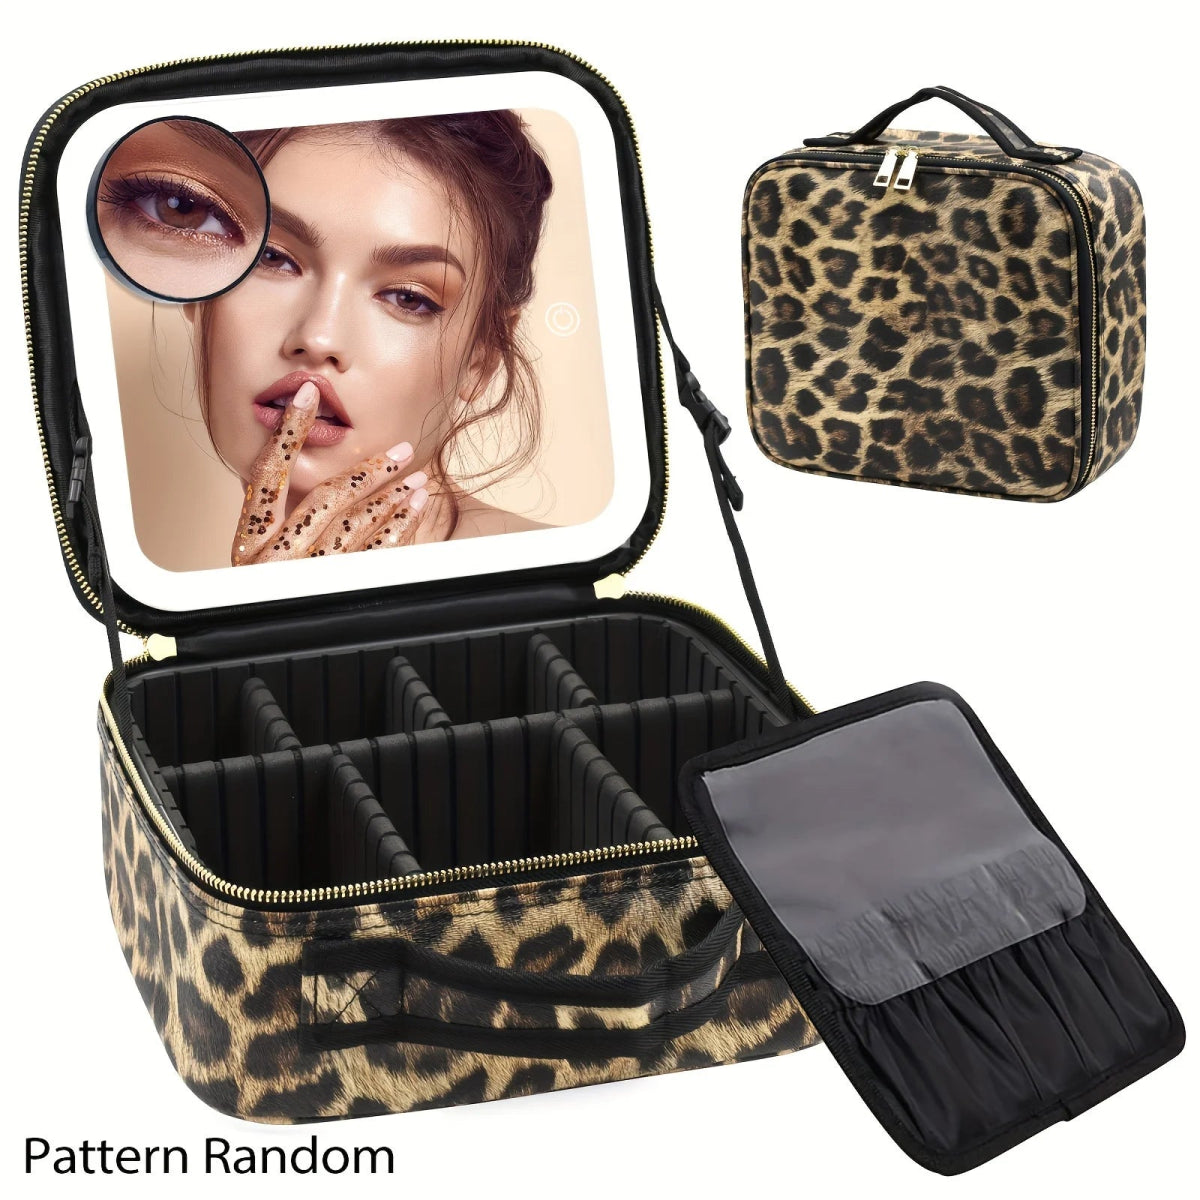 Travel Makeup Bag with LED Lighted Mirror and Adjustable Dividers - True Colour Beauty